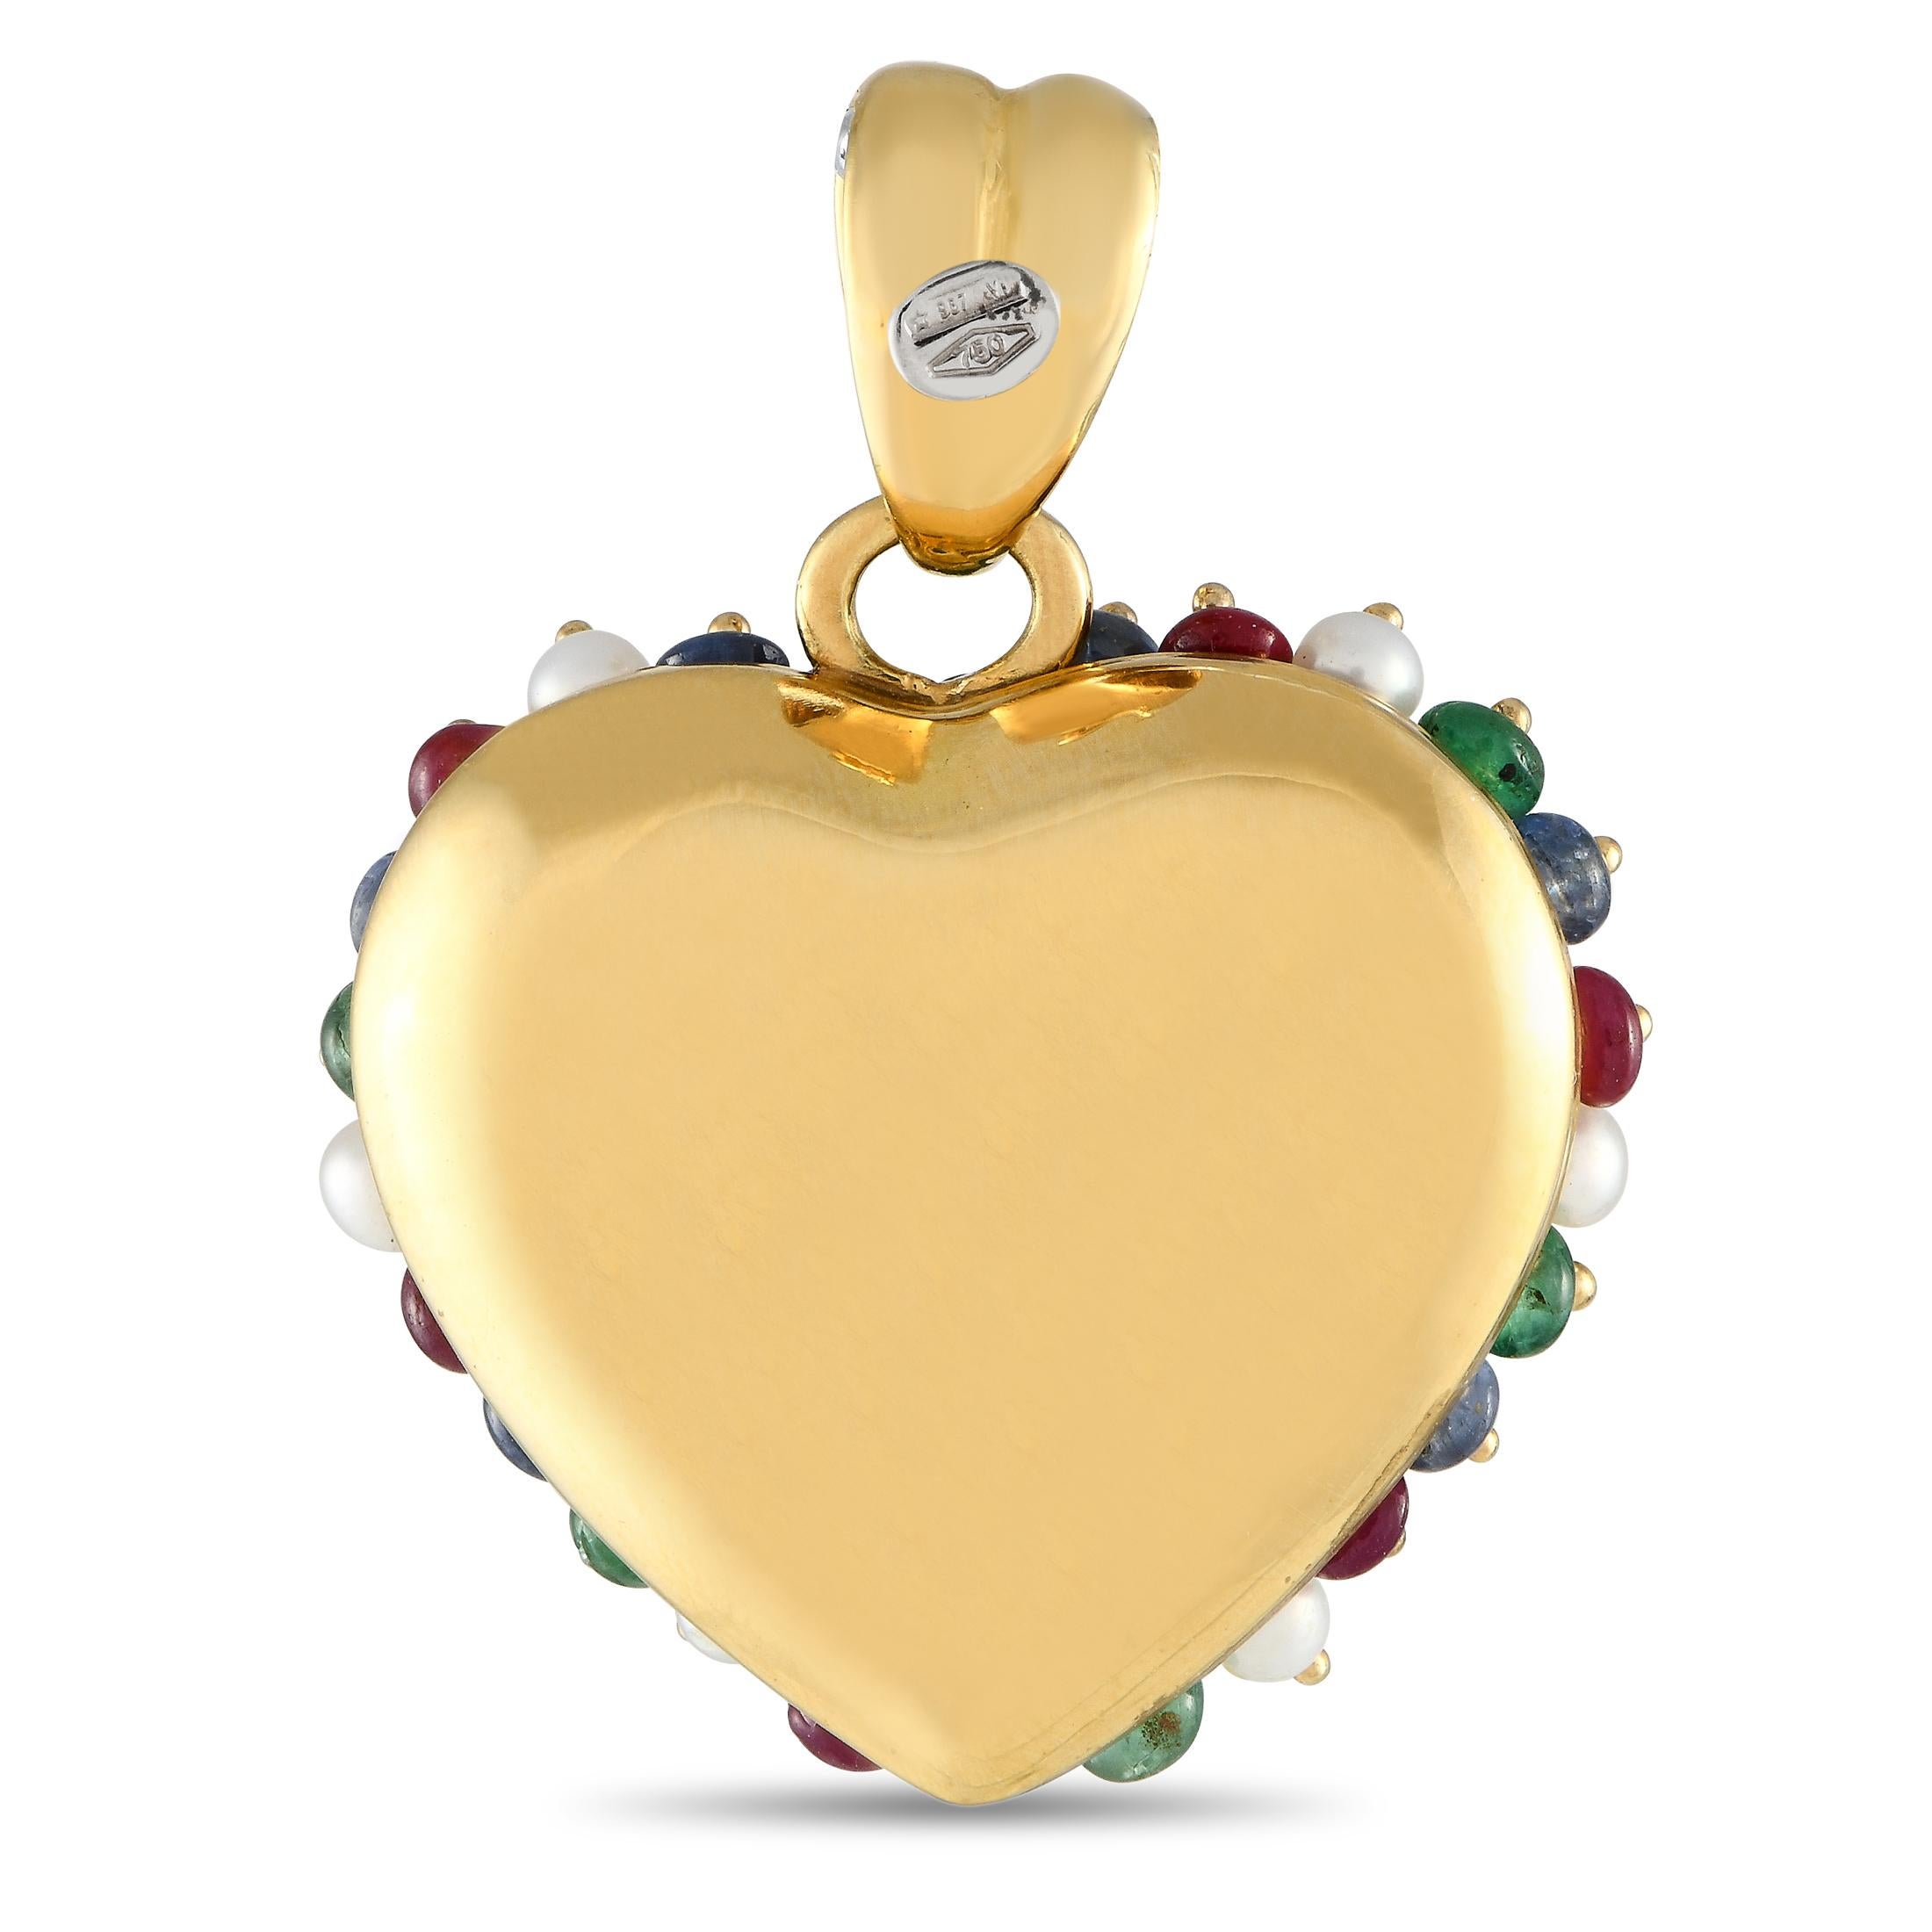 A stunning array of Sapphire, Ruby, Emerald, and Pearl gemstones make this multicolored pendant incredibly luxurious. This 18K Yellow Gold heart-shaped pendant measures 1.5 long by 1.0 wide.This jewelry piece is offered in estate condition and